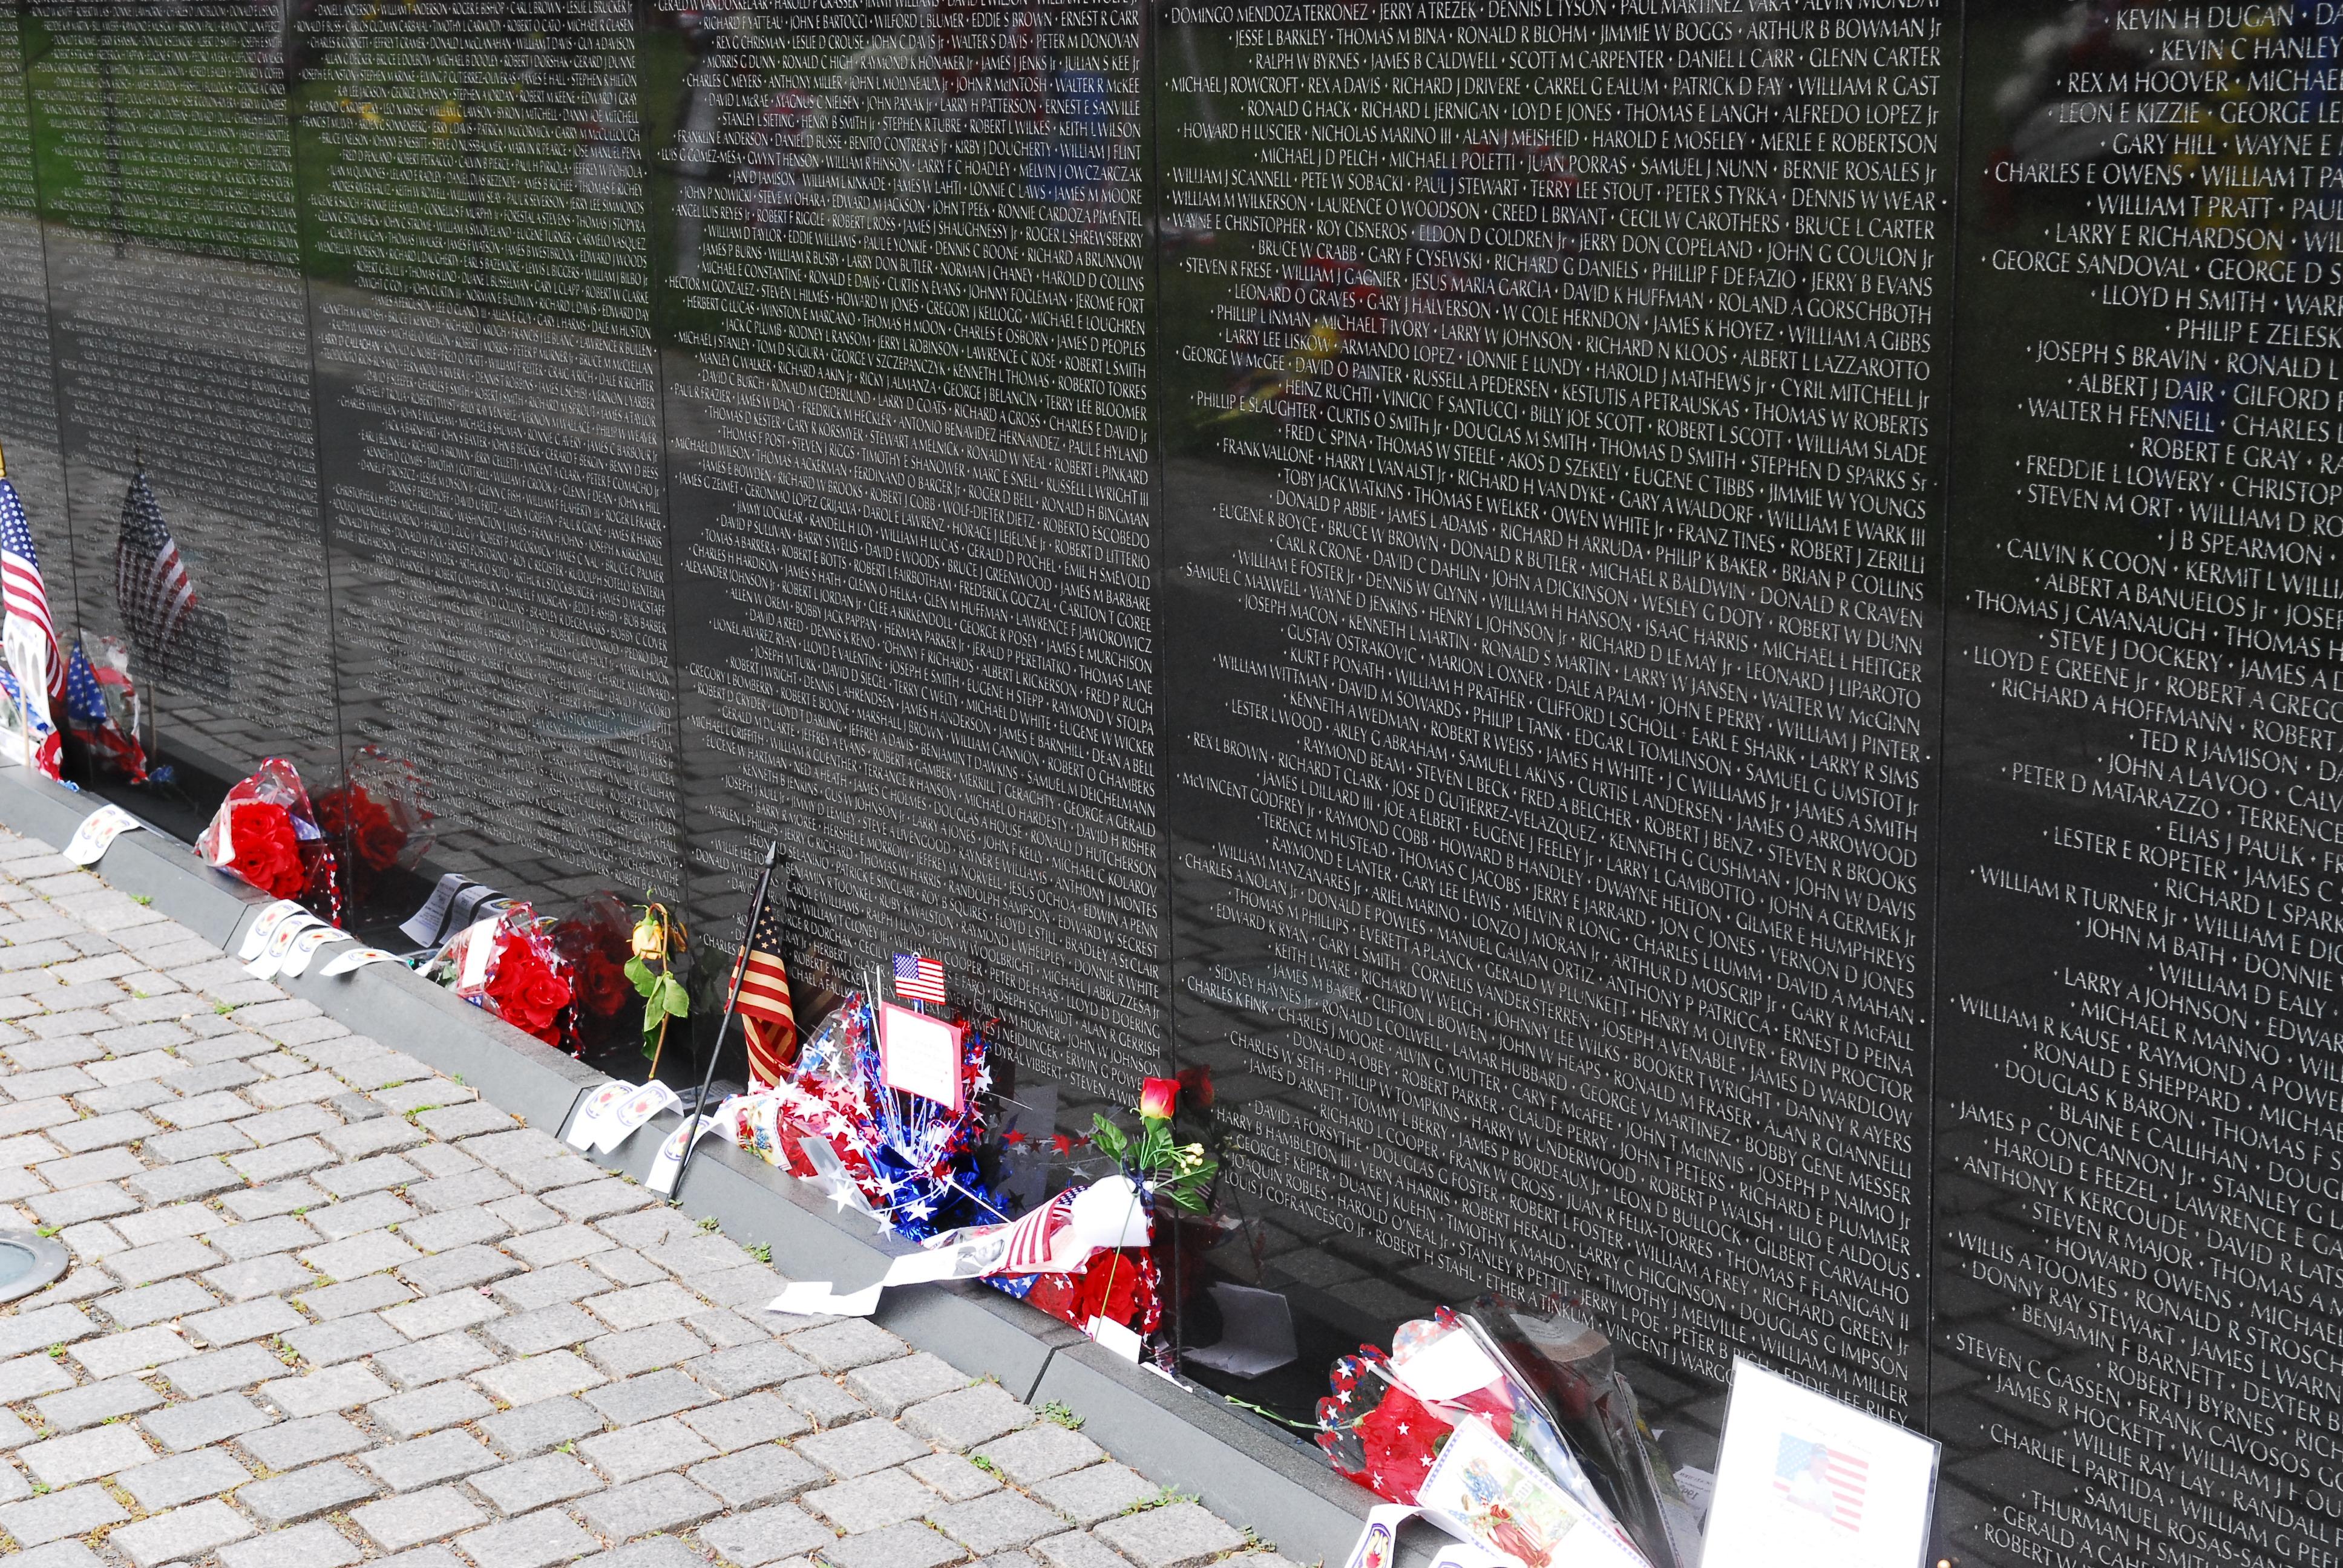 Notes and flags set at the base of the Vietnam Veterans Memorial, a black wall inscribed with names.